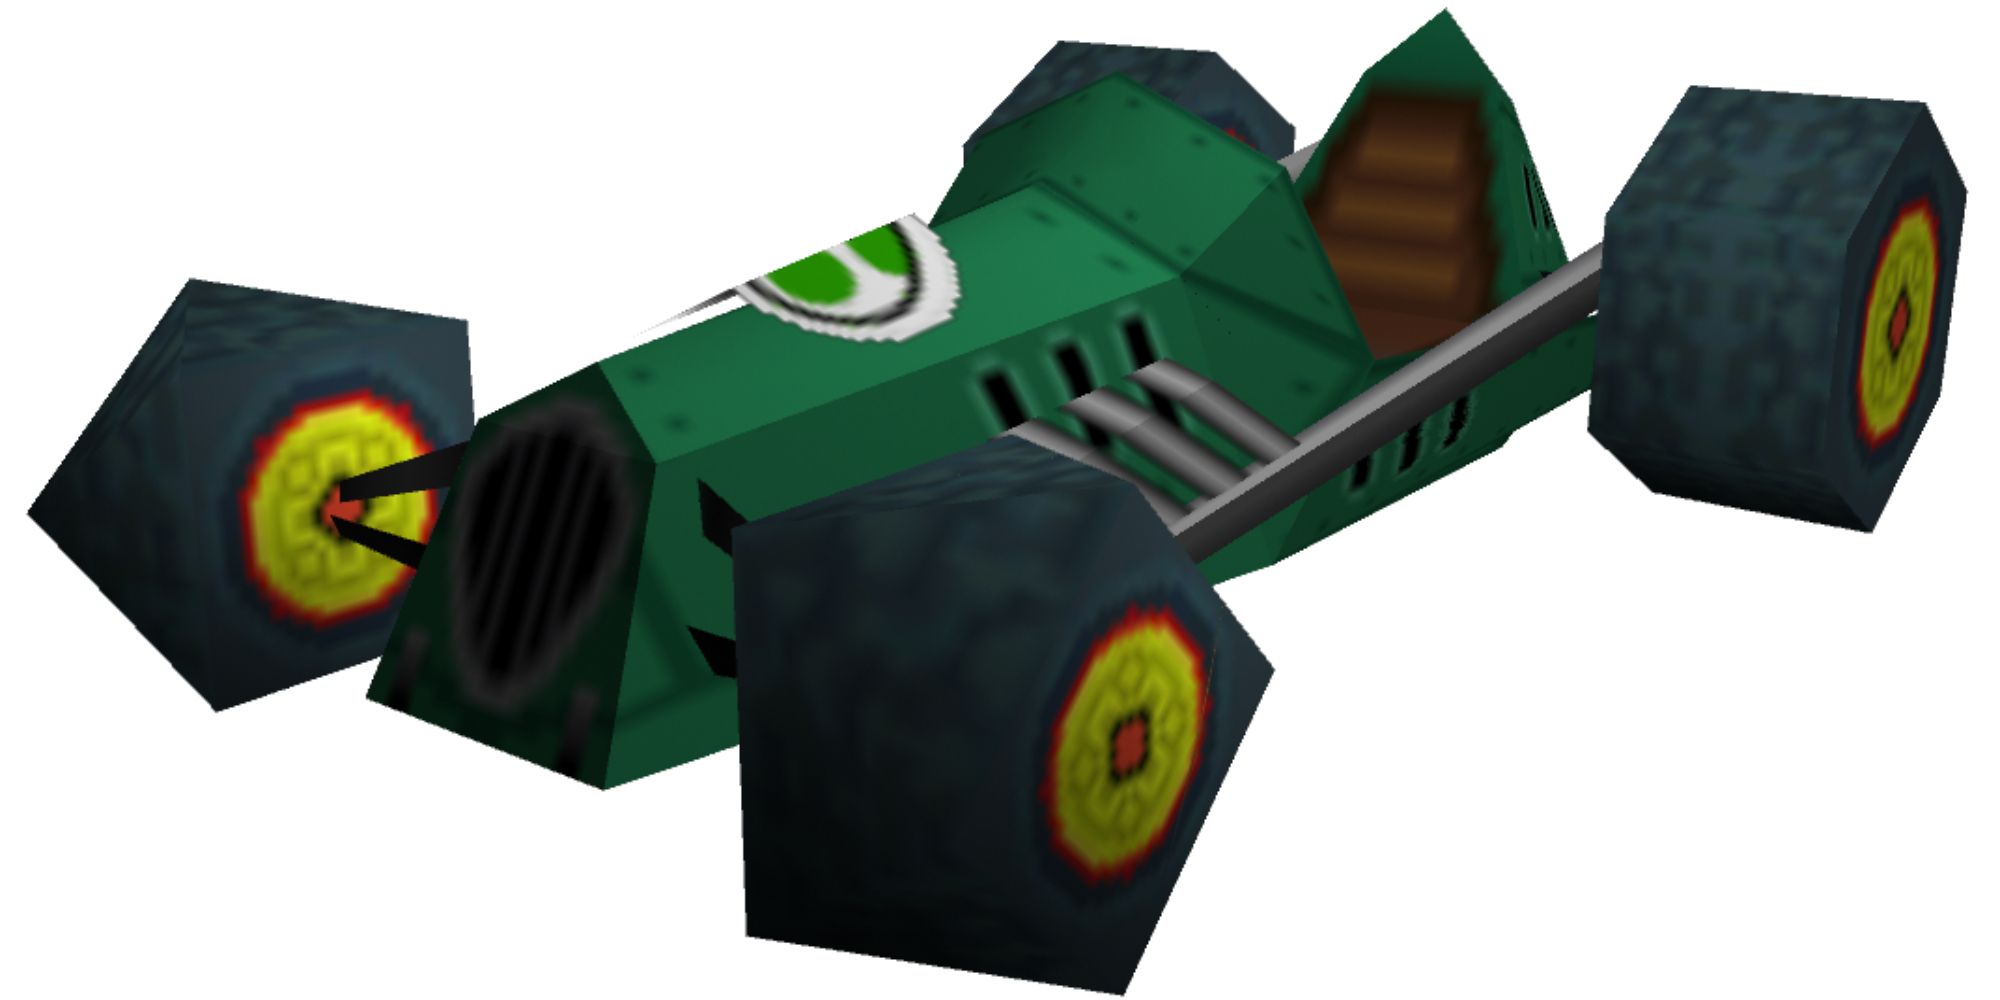 Best Vehicles an in-game picture of Yoshi's Cucumber kart from Mario Kart DS